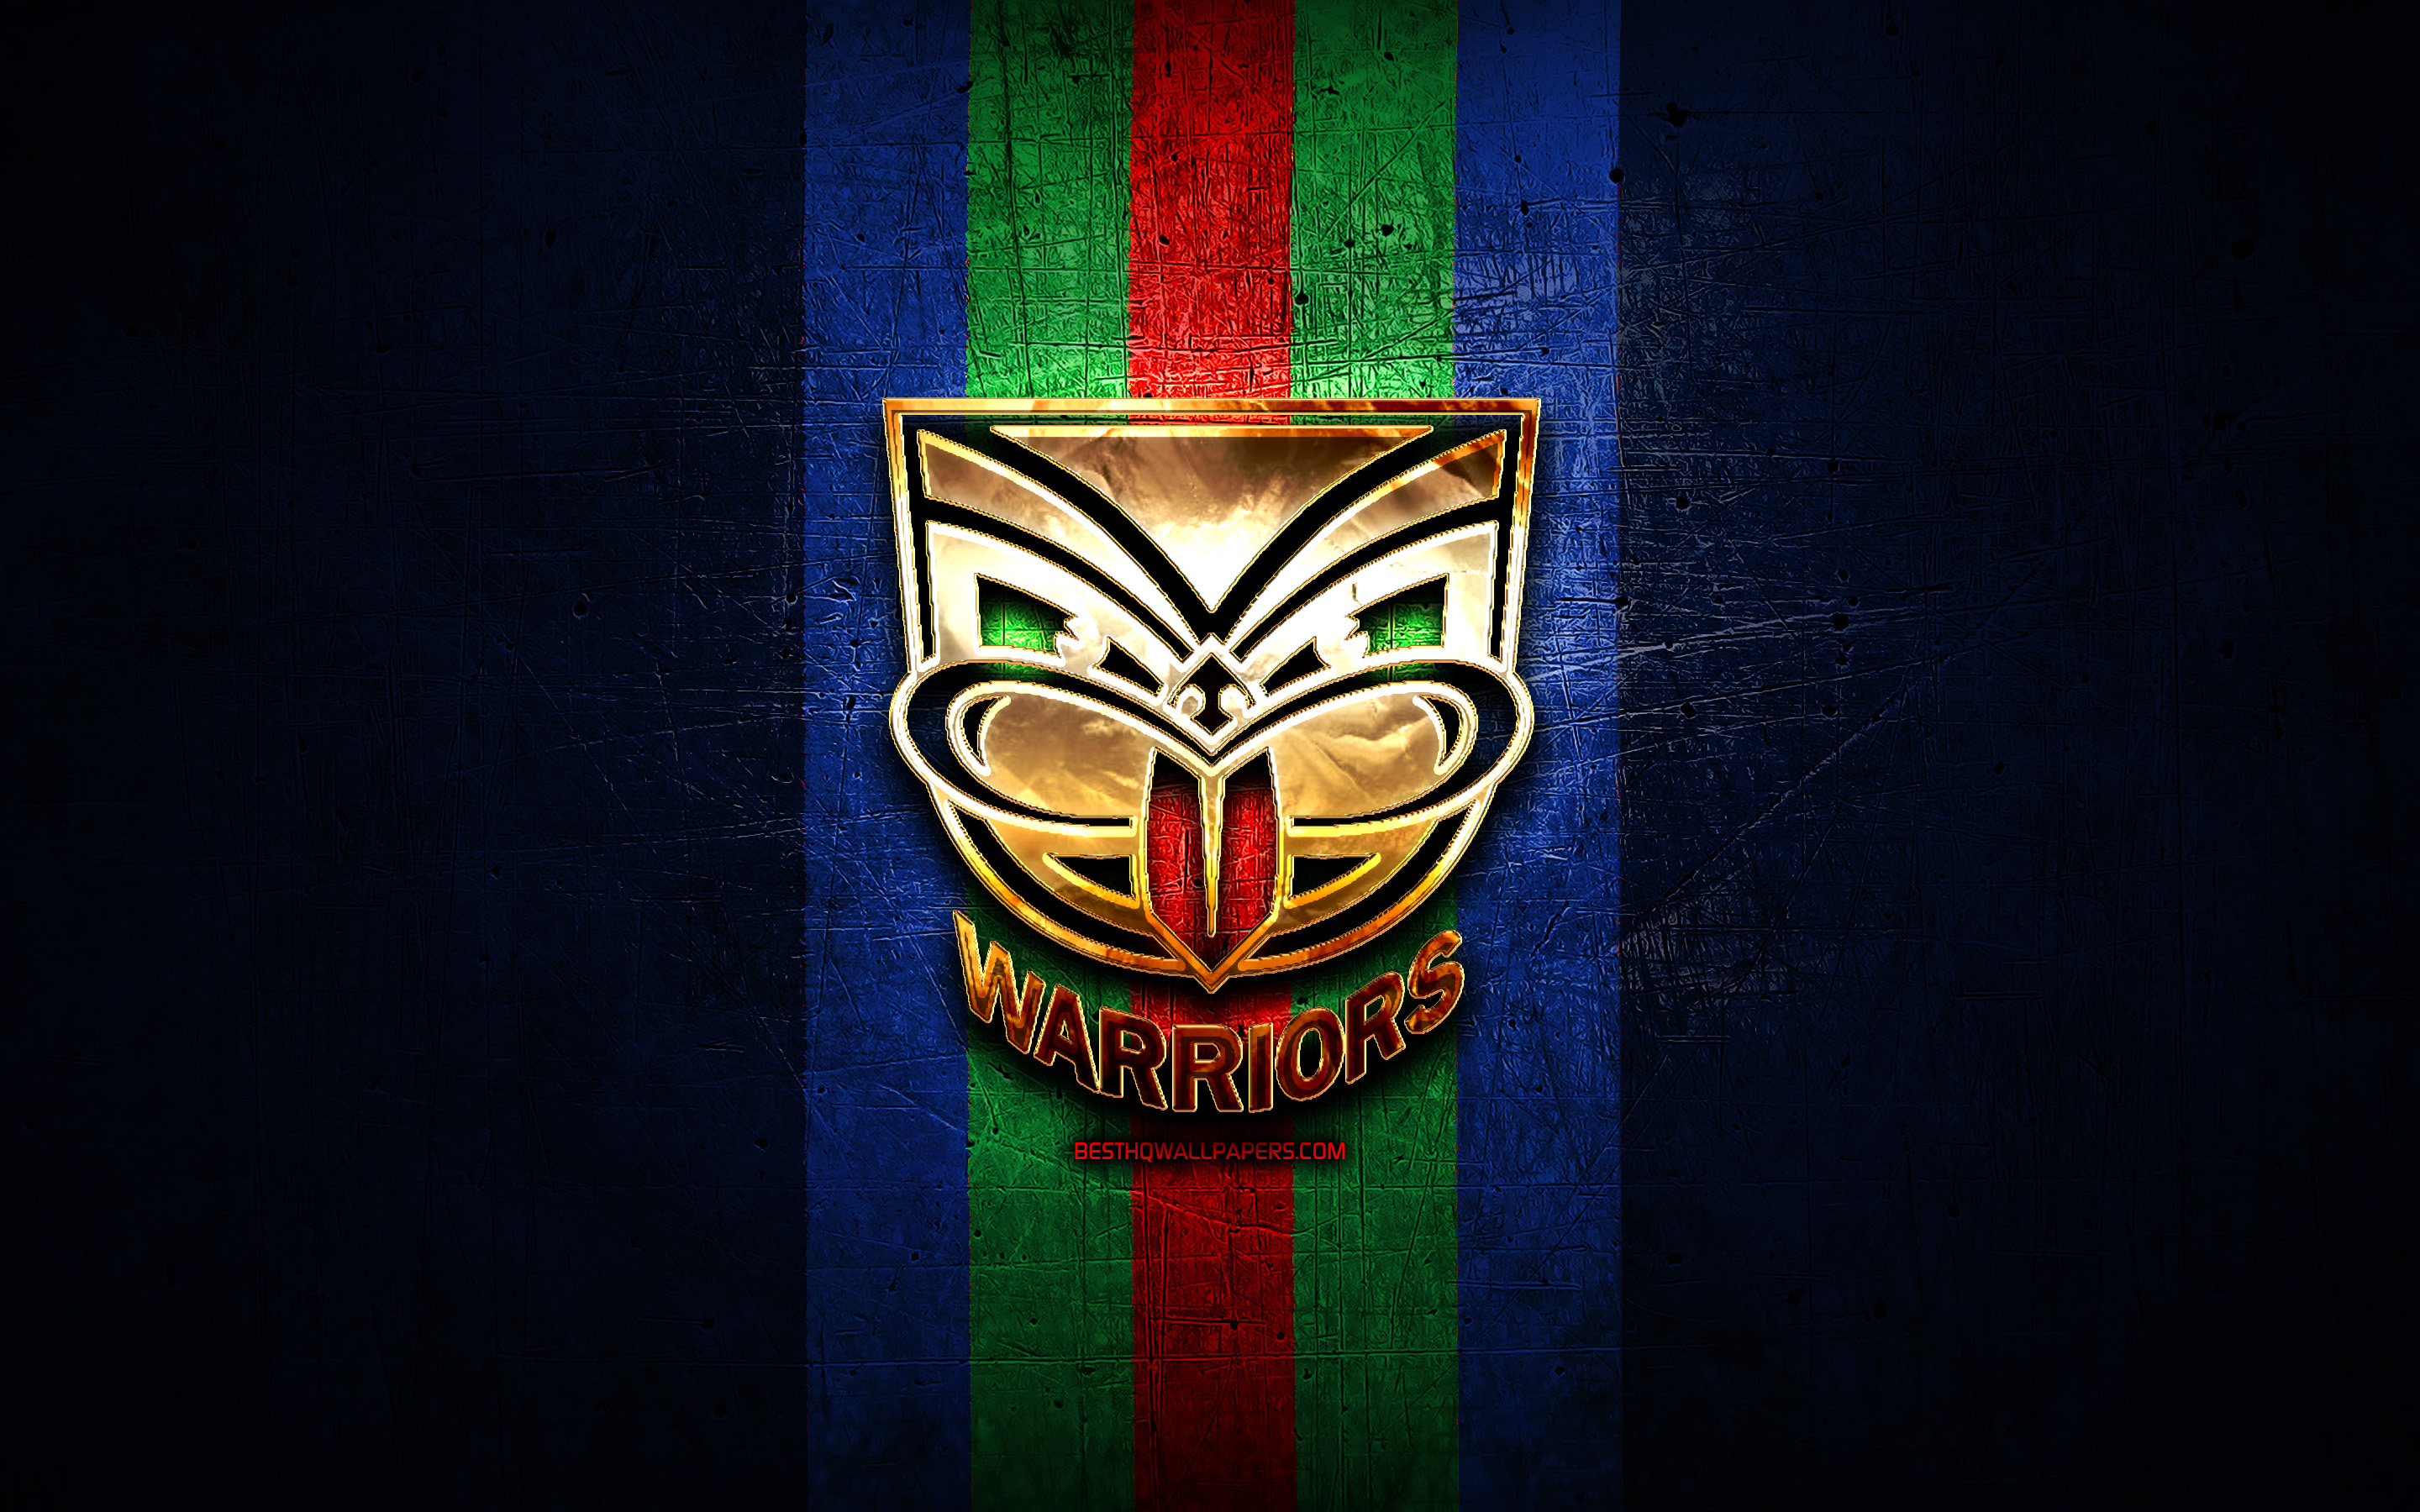 Download wallpaper New Zealand Warriors, golden logo, National Rugby League, blue metal background, australian rugby club, New Zealand Warriors logo, rugby, NRL for desktop with resolution 2880x1800. High Quality HD picture wallpaper